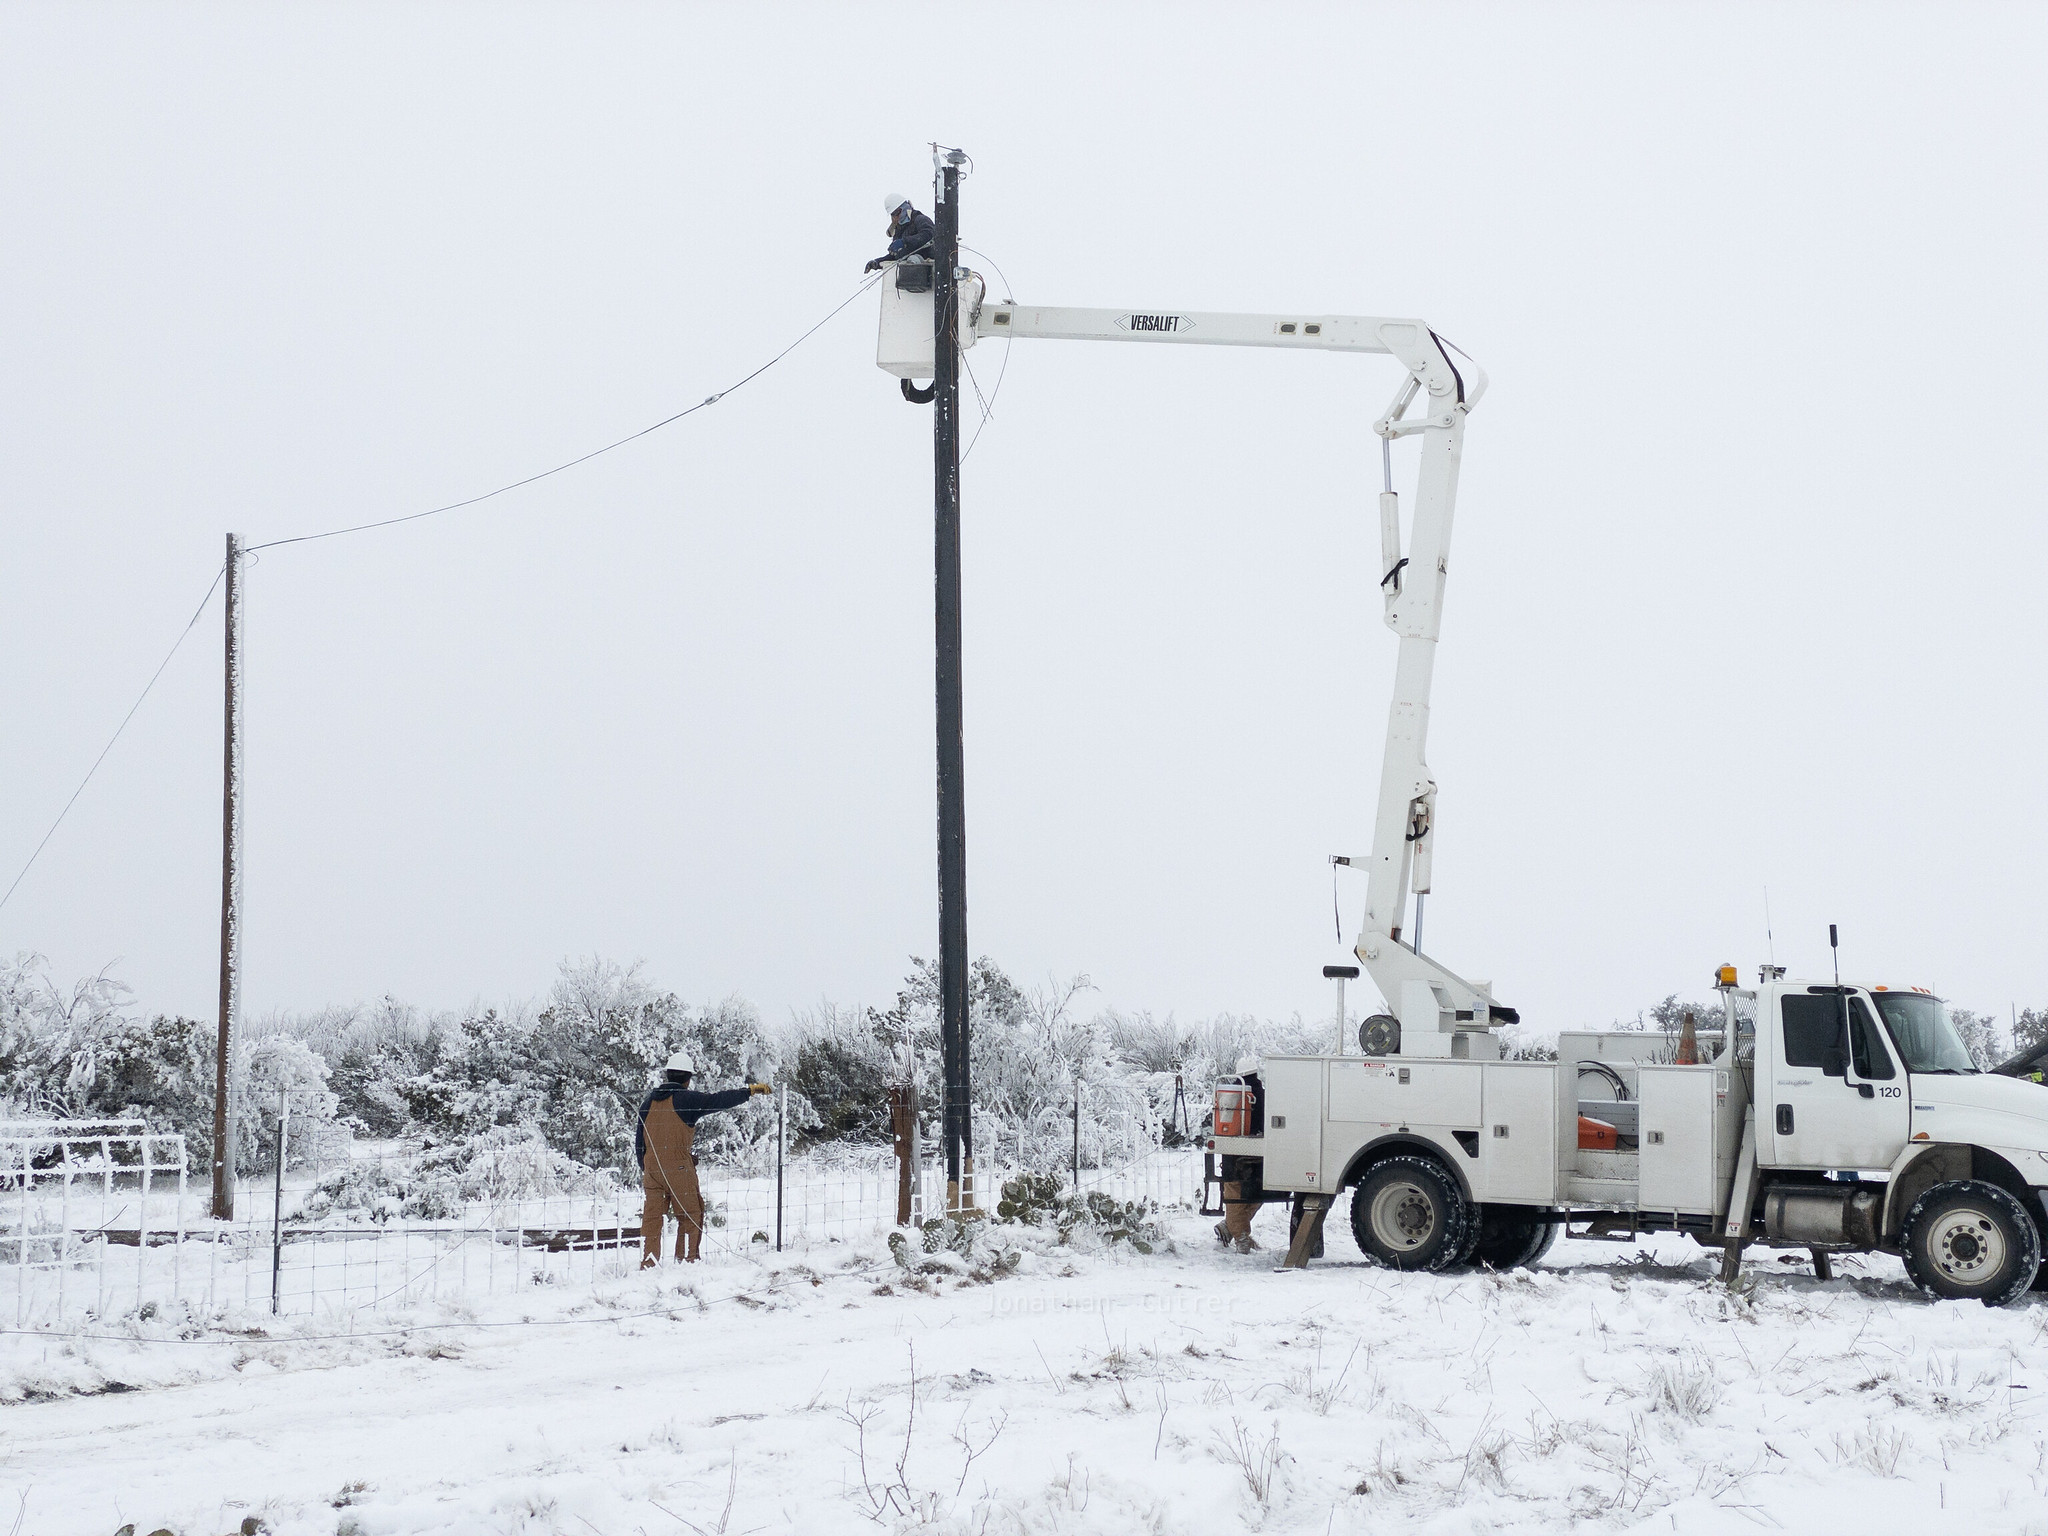 A lineman is working at the top of an electric wire pole while a colleague stands below in the snow.